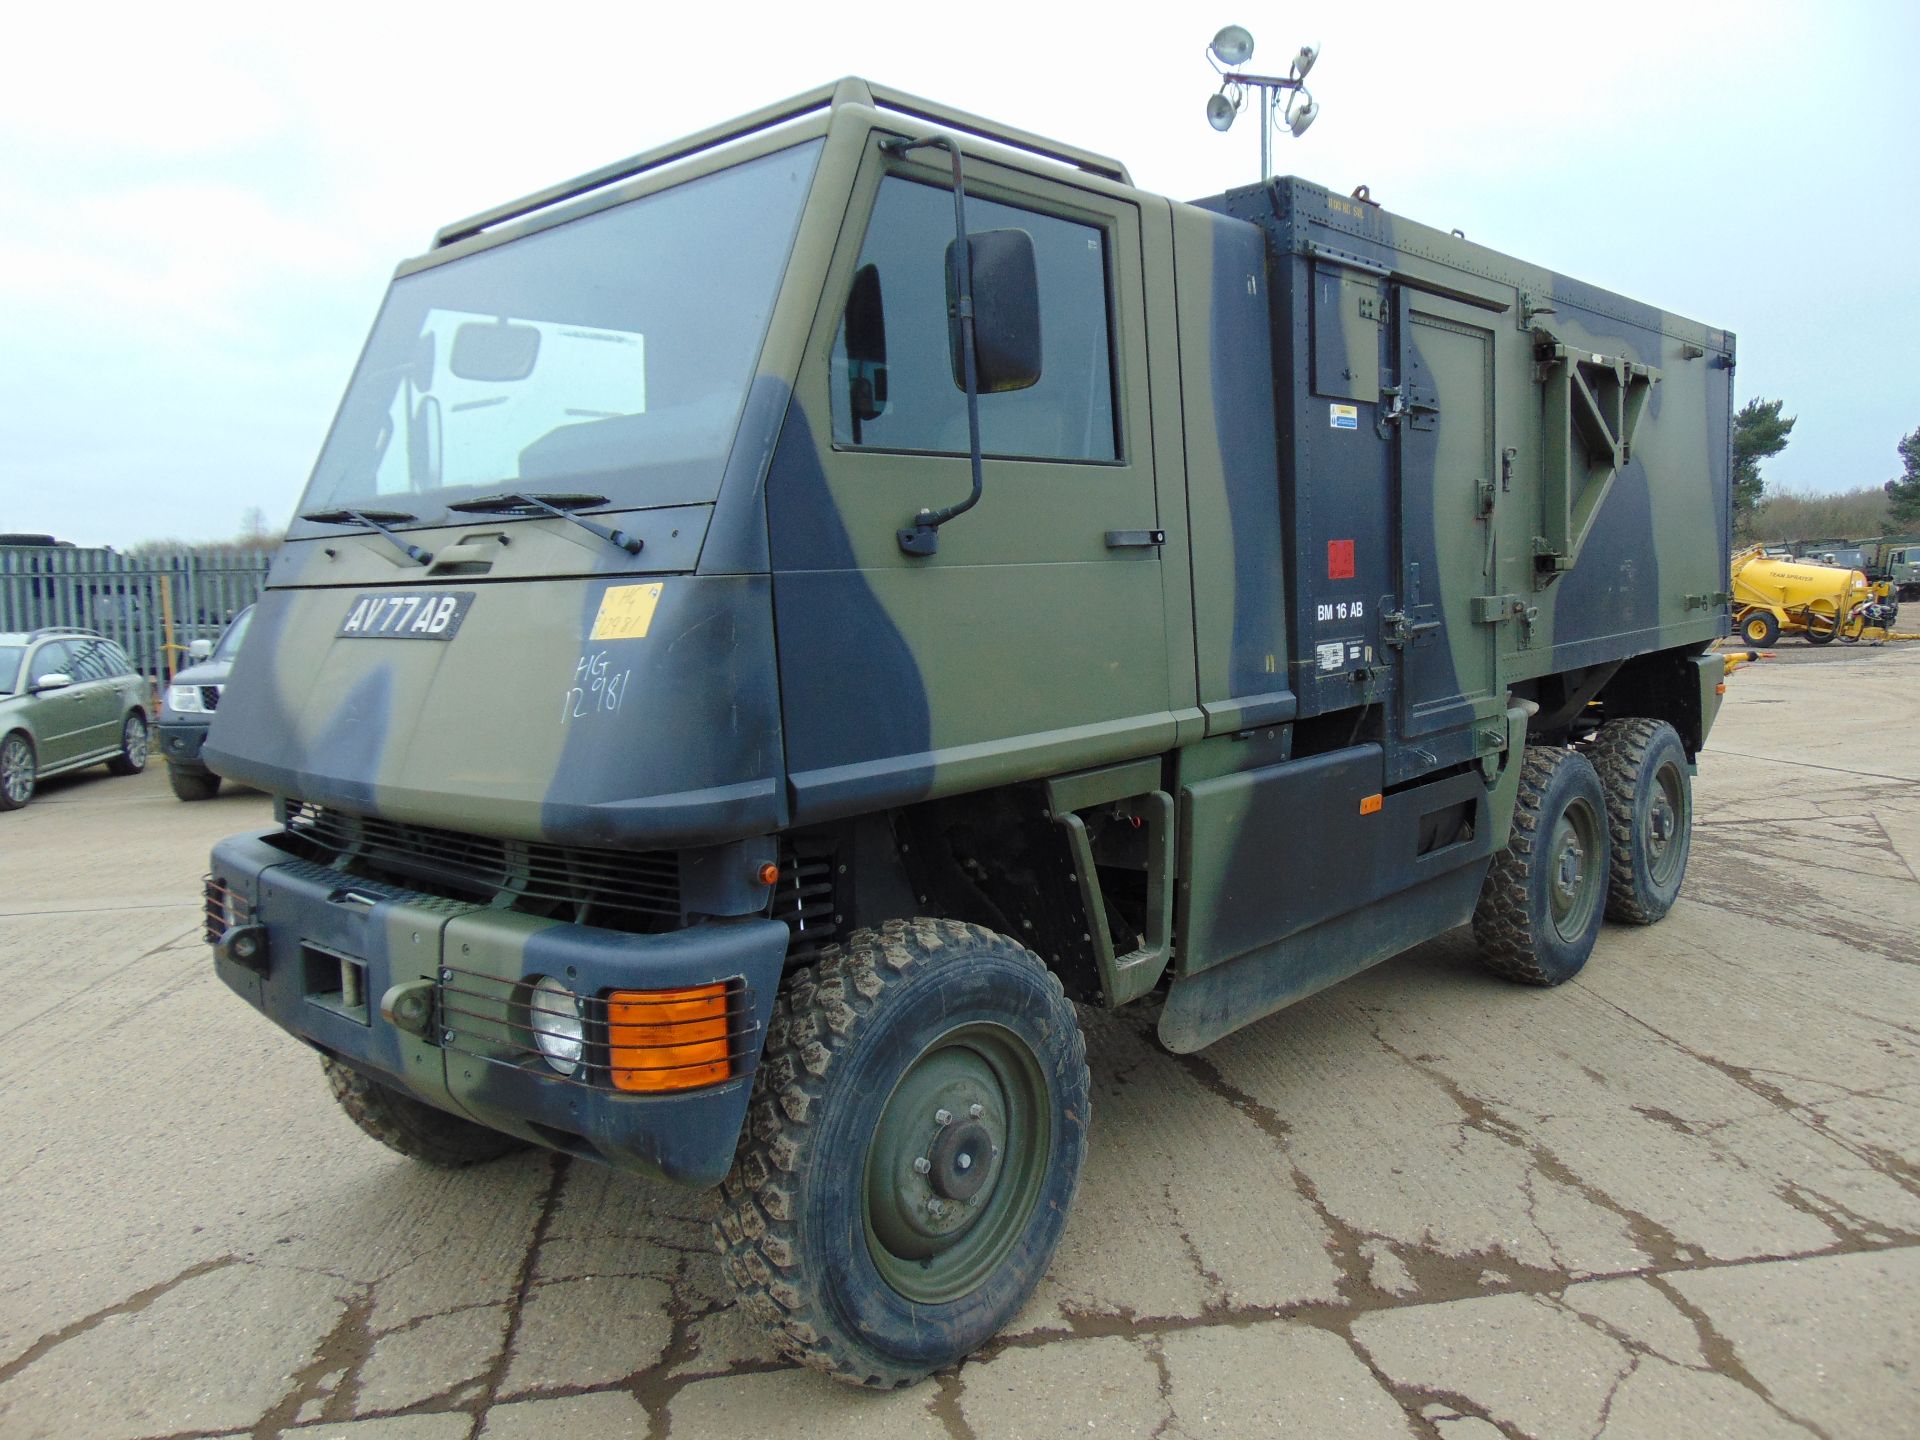 Ex Reserve Left Hand Drive Mowag Bucher Duro II 6x6 High-Mobility Tactical Vehicle - Image 3 of 16